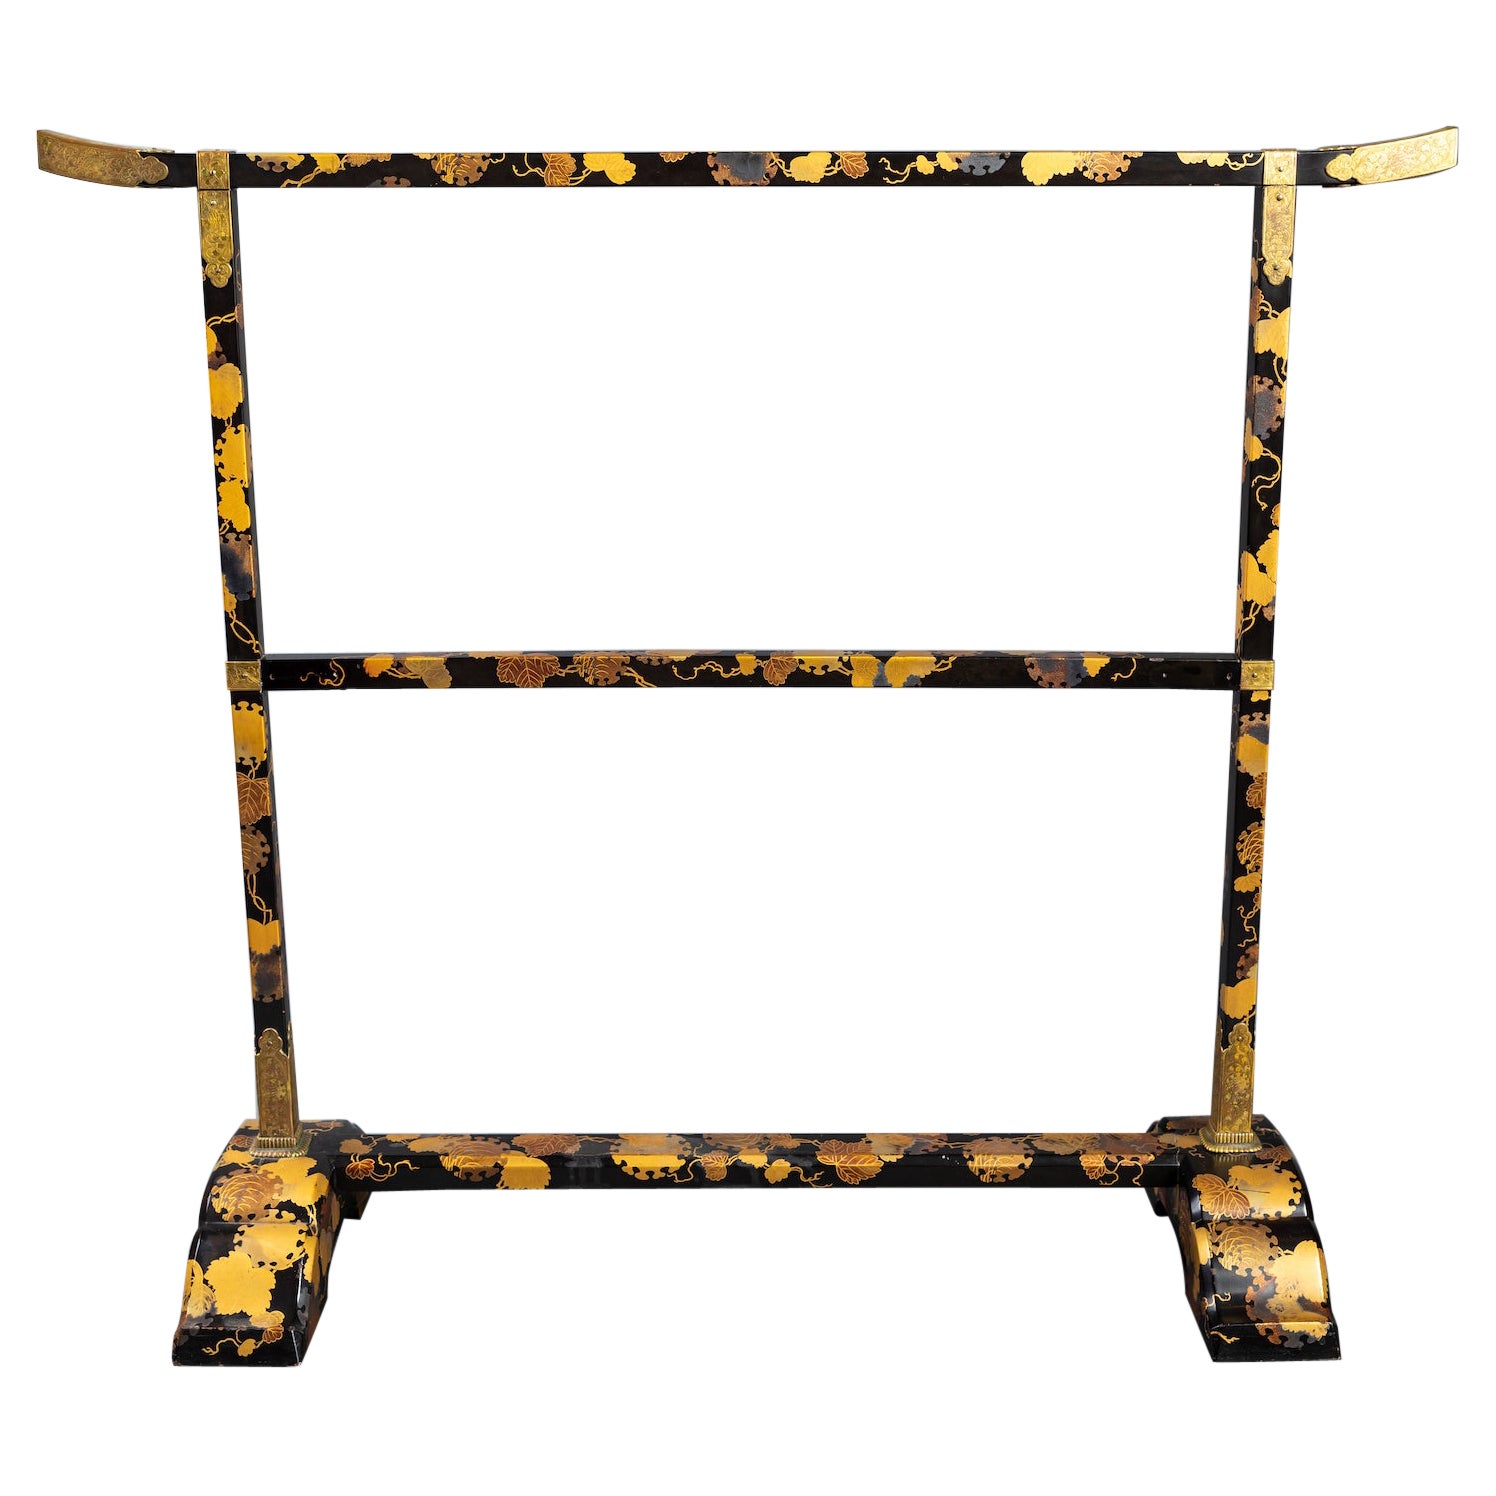 Beautifully Decorated Lacquer Towel  Rack for Tea Ceremony. 